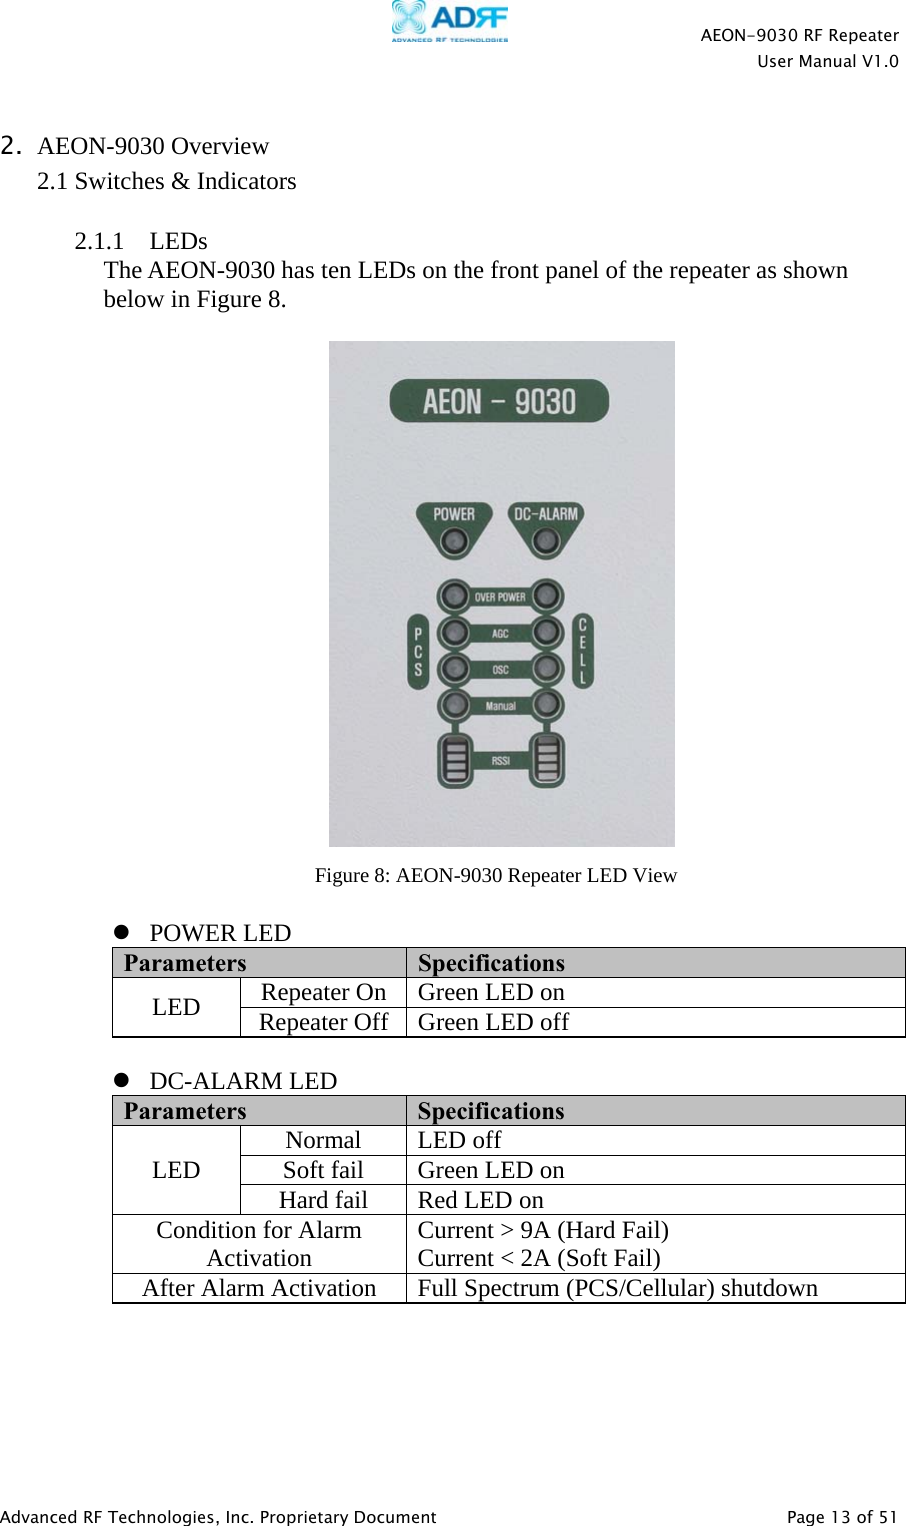    AEON-9030 RF Repeater  User Manual V1.0  Advanced RF Technologies, Inc. Proprietary Document   Page 13 of 51  2. AEON-9030 Overview 2.1 Switches &amp; Indicators  2.1.1    LEDs  The AEON-9030 has ten LEDs on the front panel of the repeater as shown below in Figure 8.       POWER LED Parameters  Specifications LED  Repeater On  Green LED on Repeater Off  Green LED off   DC-ALARM LED Parameters  Specifications LED  Normal LED off Soft fail  Green LED on Hard fail  Red LED on Condition for Alarm Activation  Current &gt; 9A (Hard Fail) Current &lt; 2A (Soft Fail) After Alarm Activation  Full Spectrum (PCS/Cellular) shutdown      Figure 8: AEON-9030 Repeater LED View 